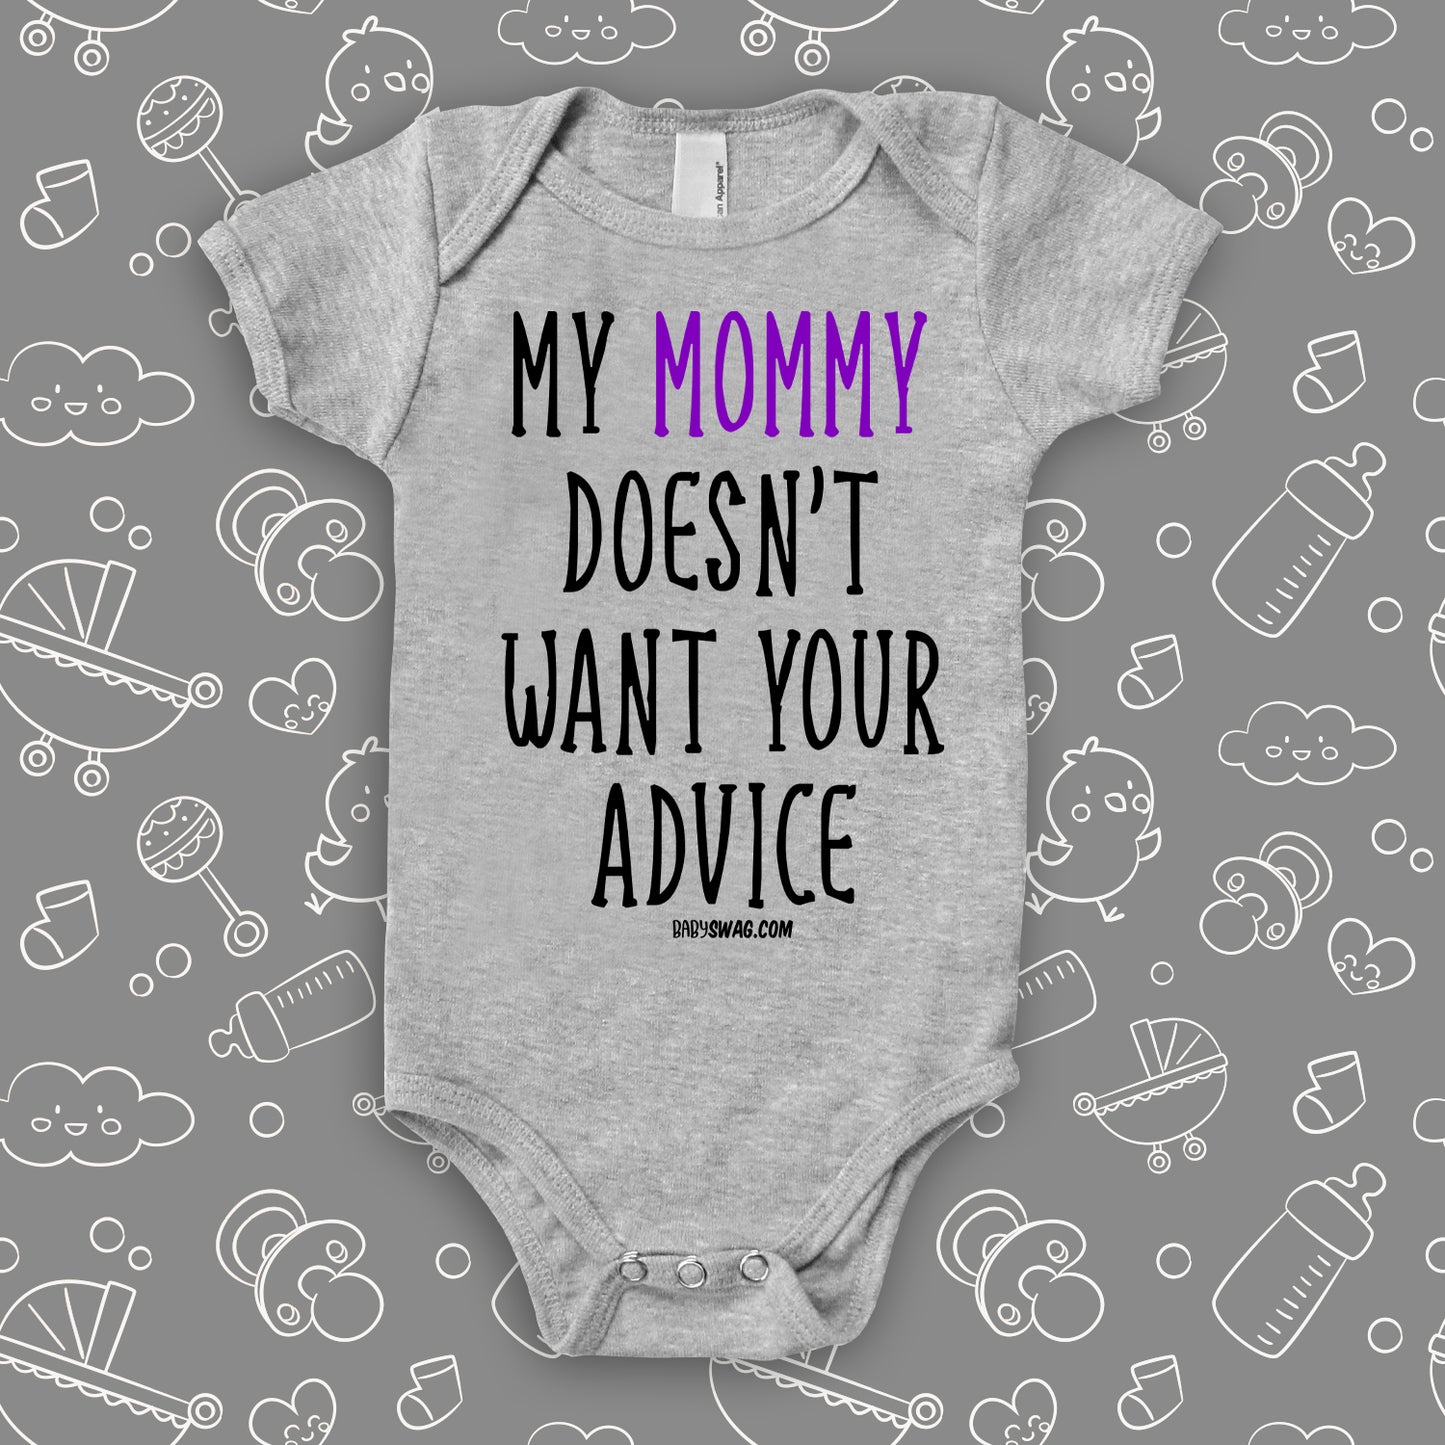 My Mommy Doesn't Want Your Advice